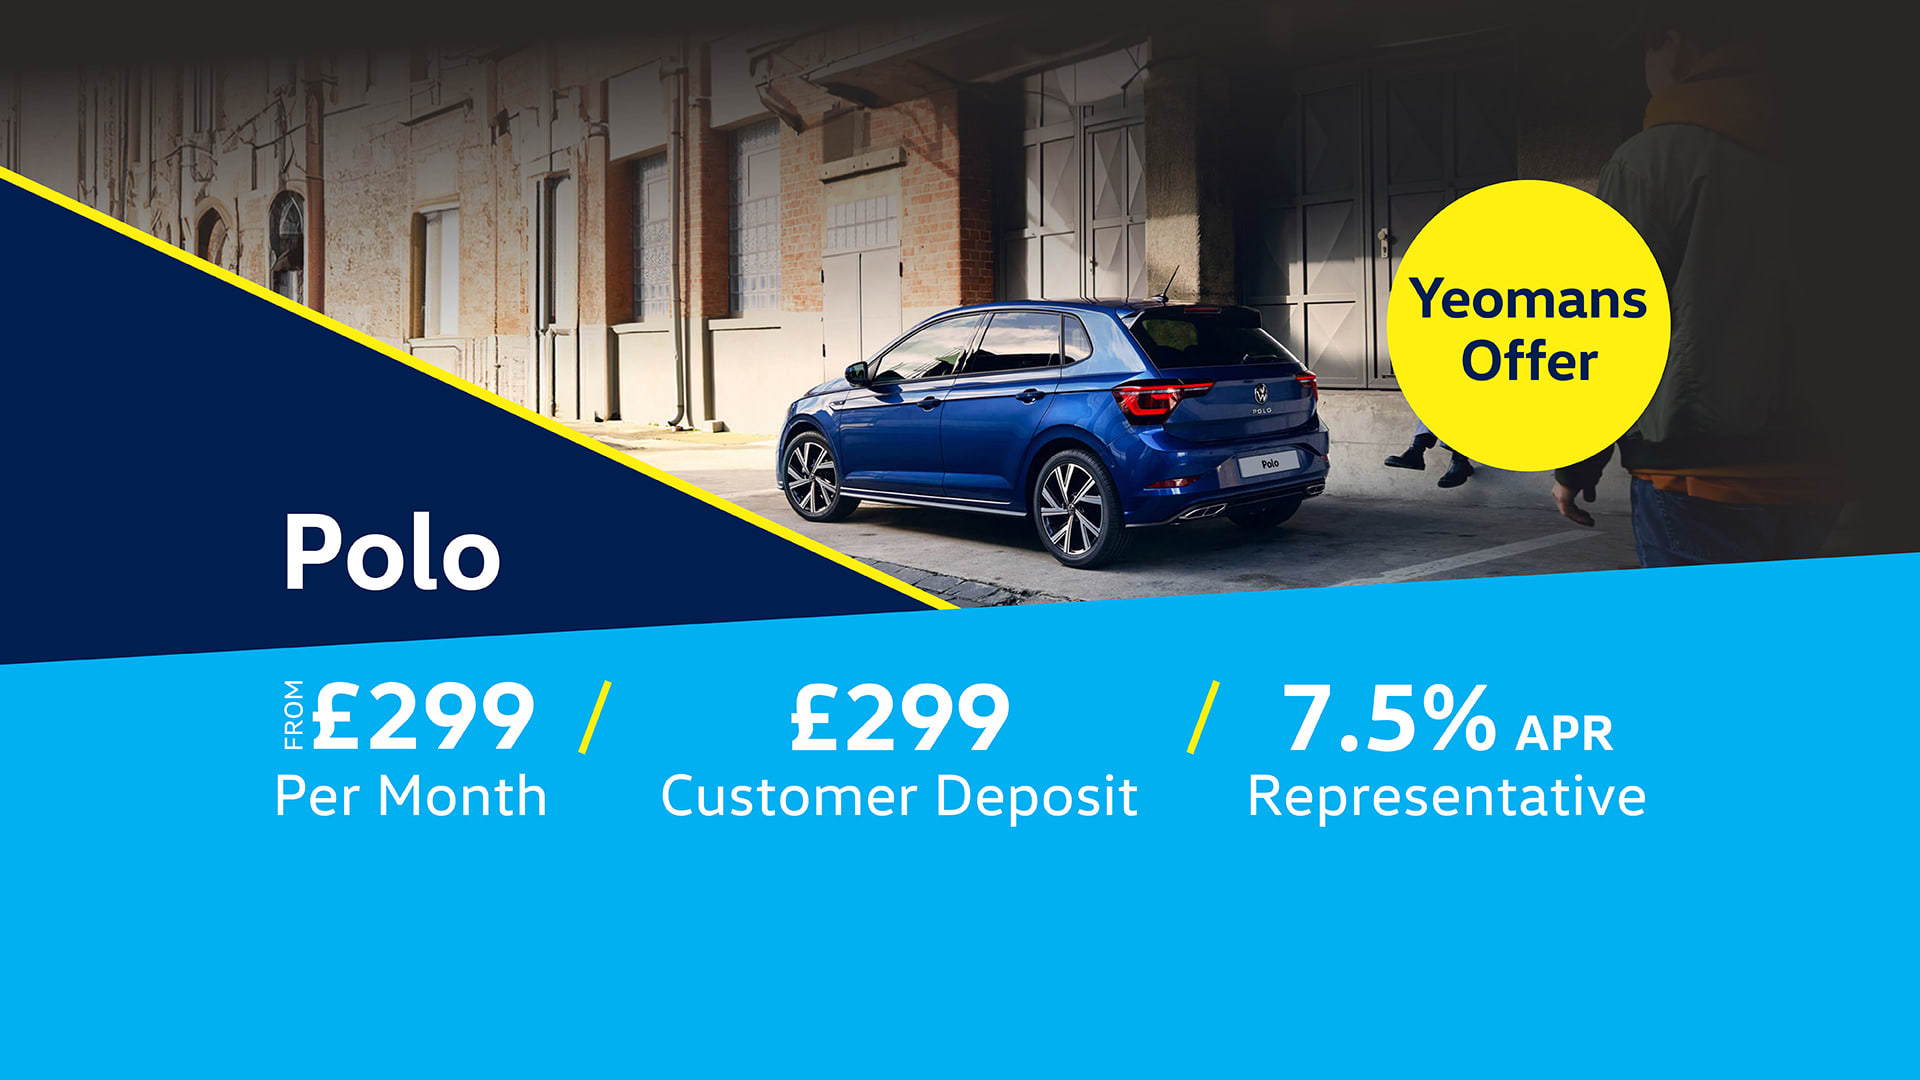 Yeomans Offer - Volkswagen Polo